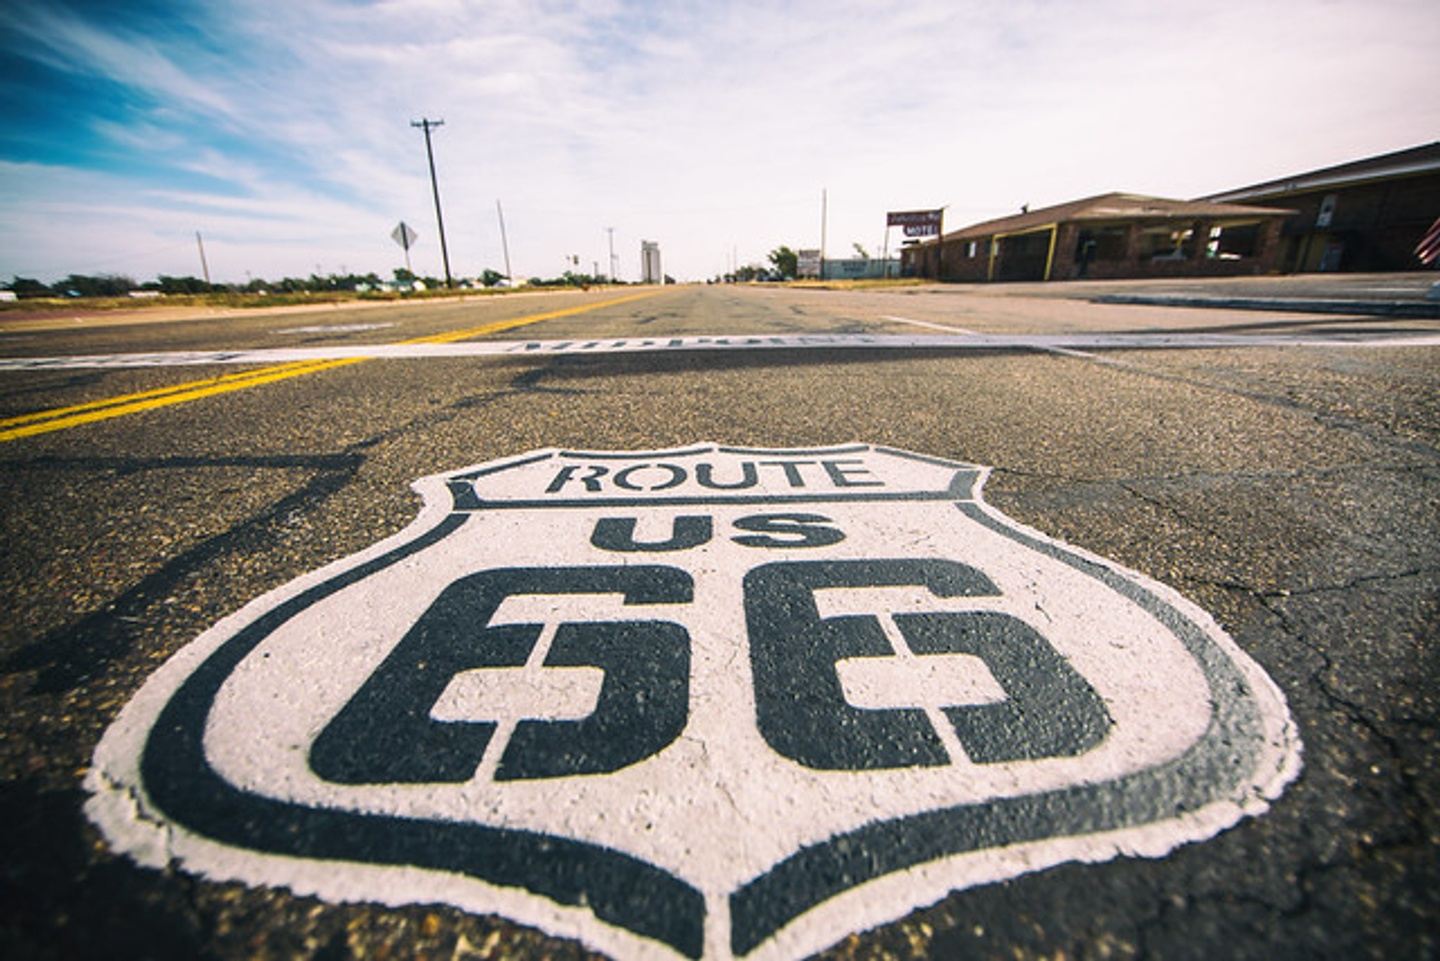 Route 66 and Nuclear Science and History Museum 12:00 - 4:00 PM